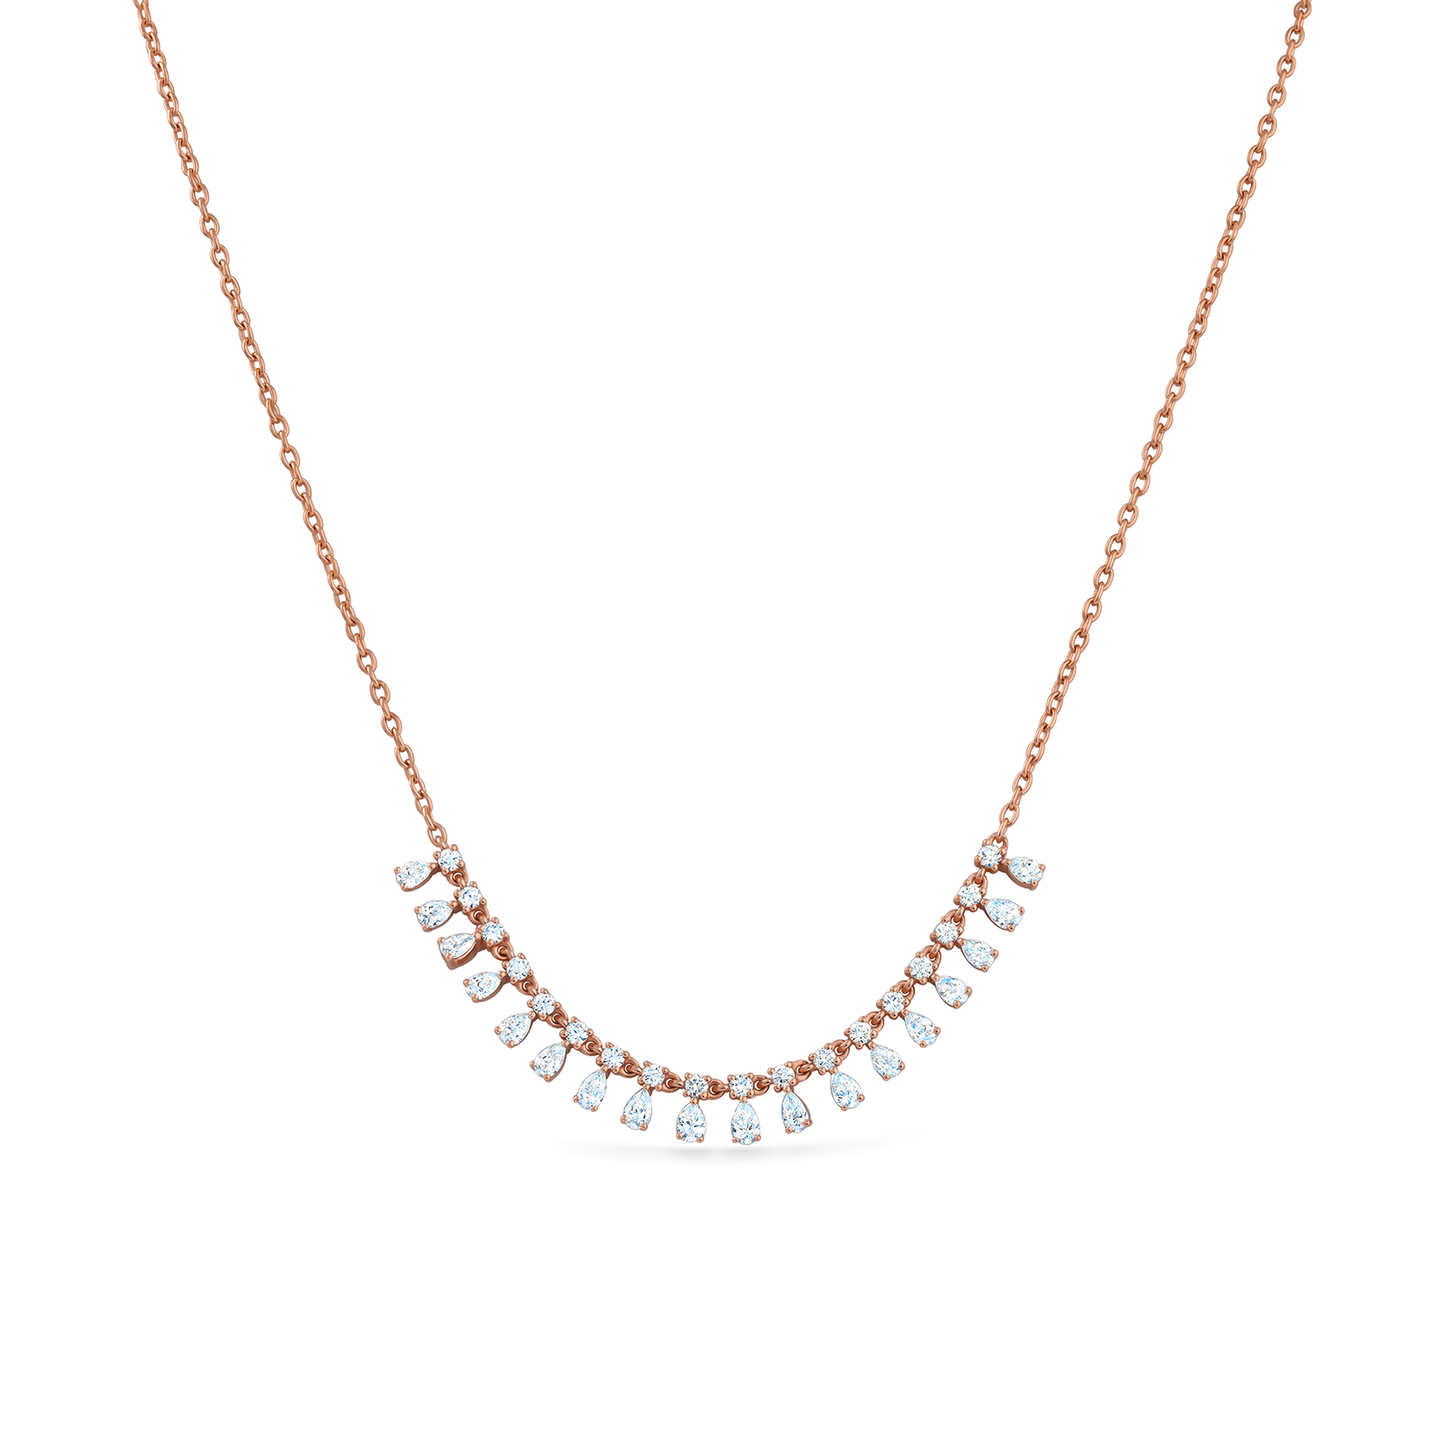 Oliver Heemeyer Rian diamond necklace made of 18k rose gold.